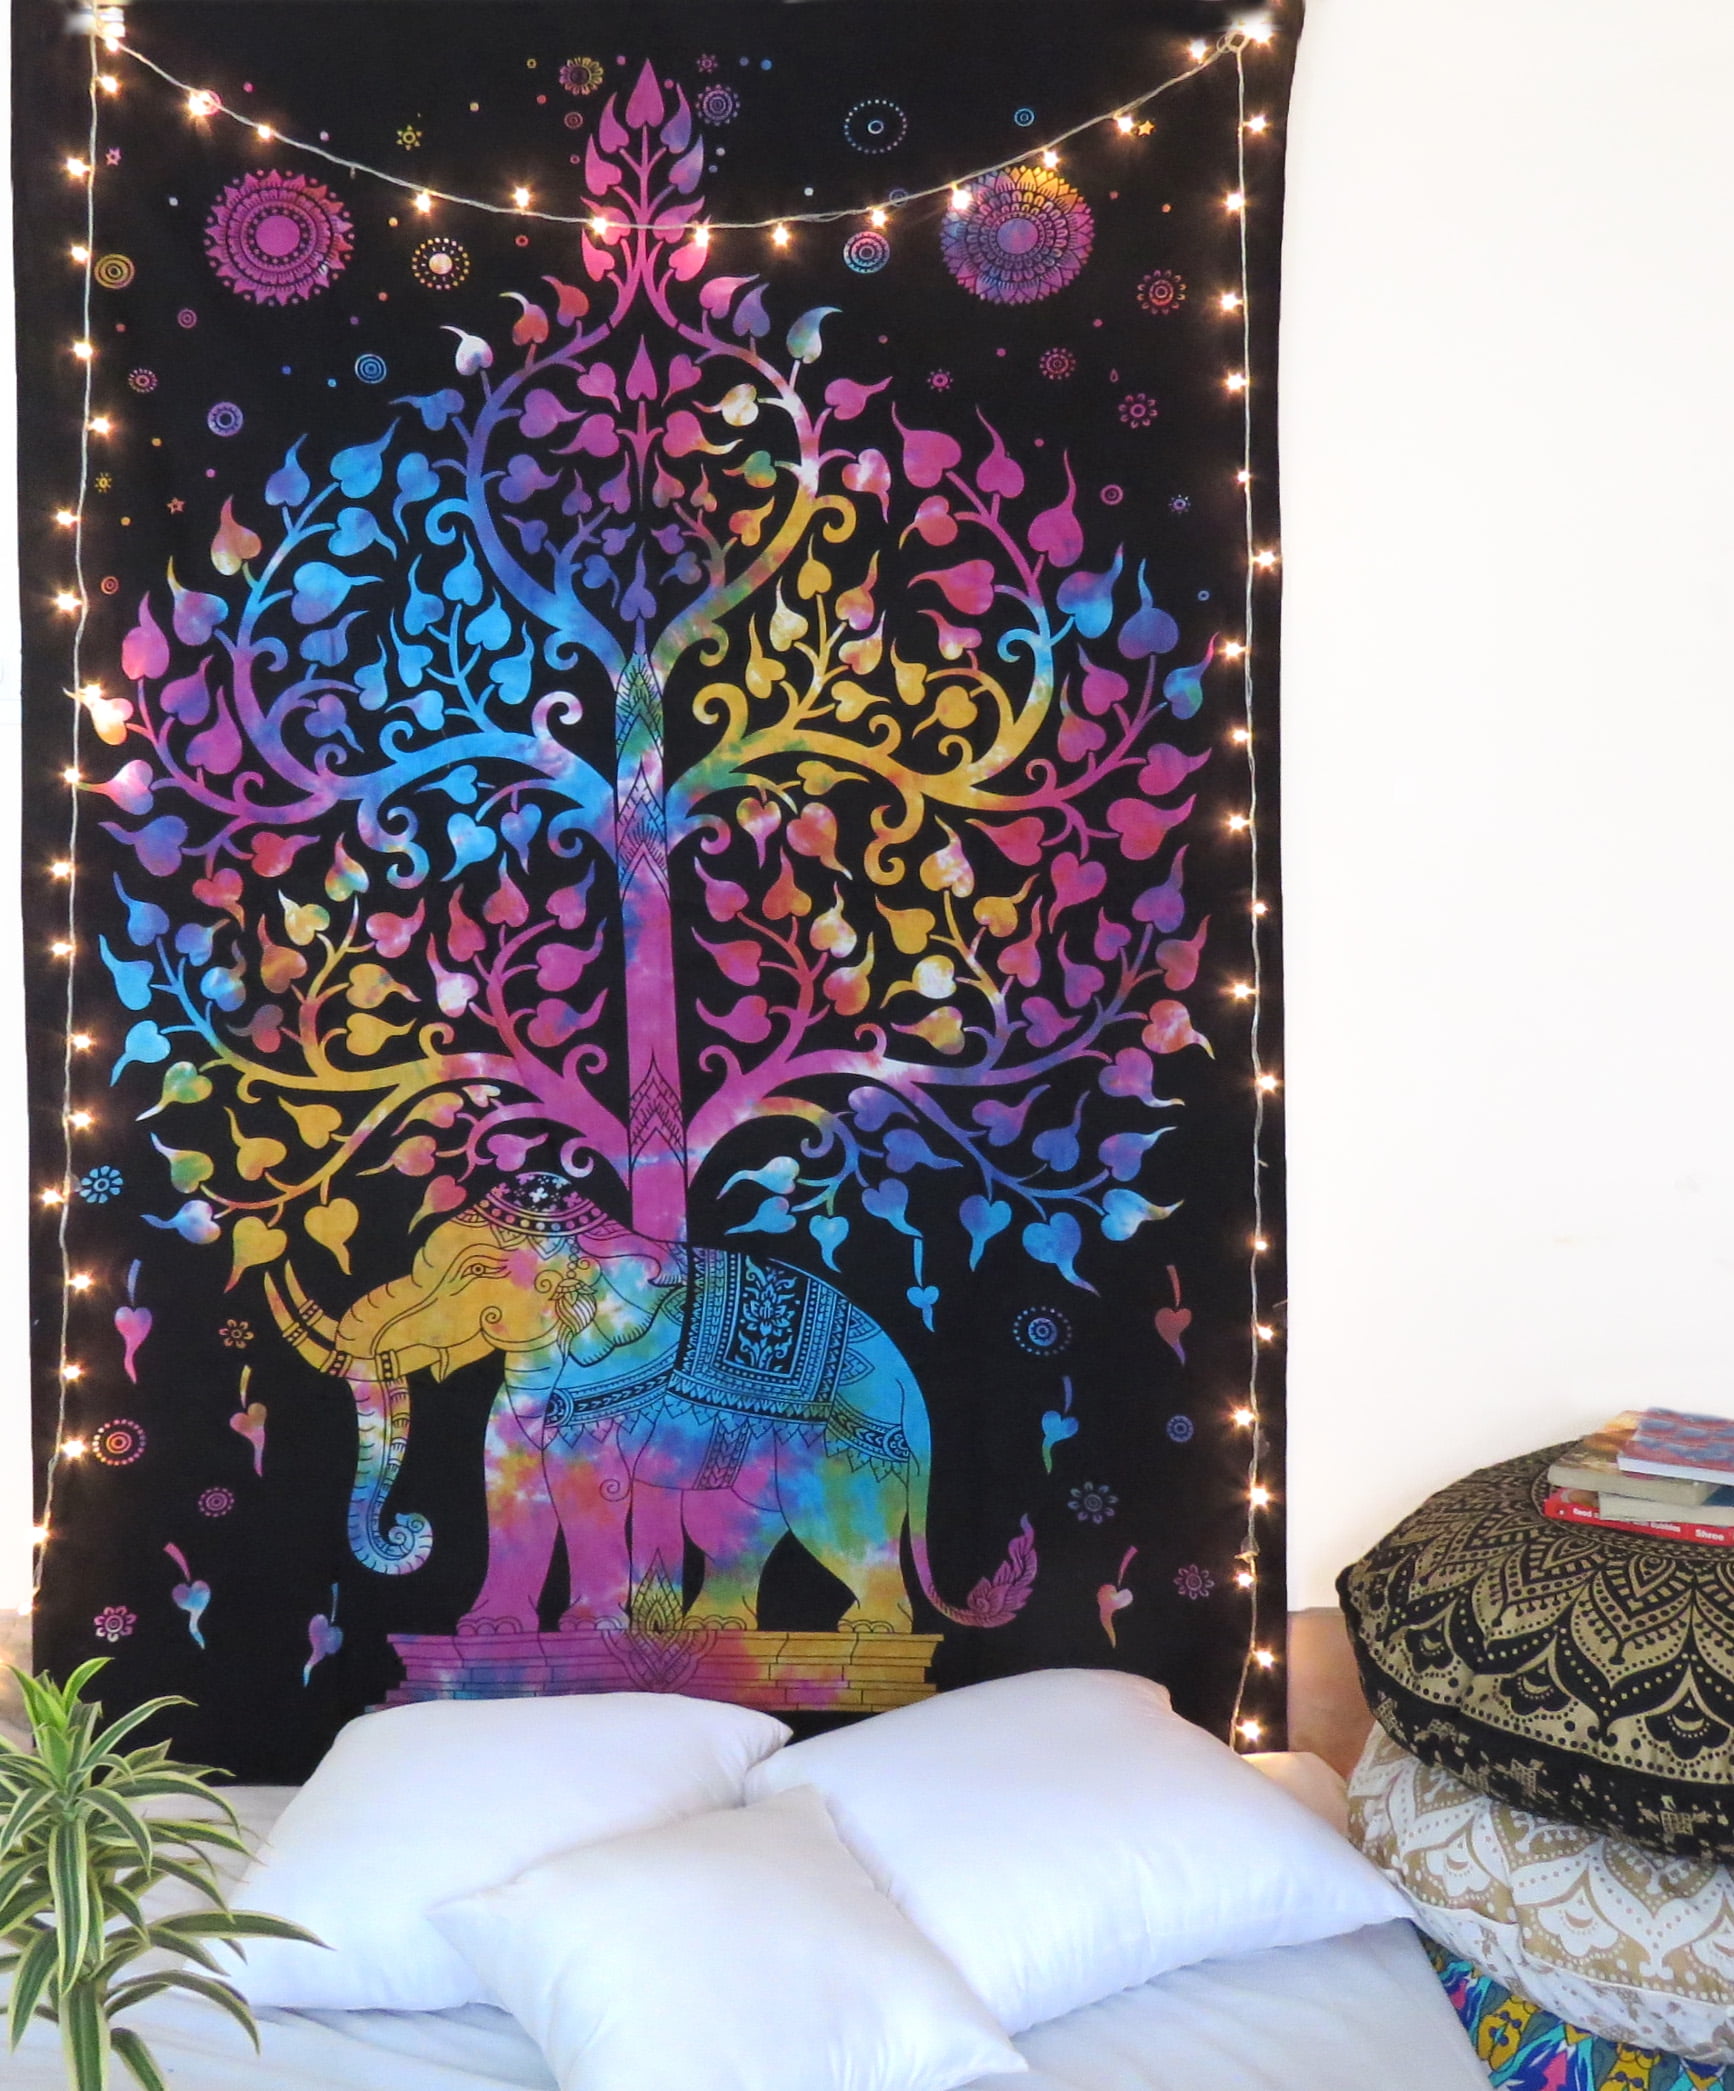 Namaste Tapestry Wall Hanging Relax Chill Yoga Tree Tapestries Dorm Room Bedroom Decor Art Printed in the USA Small to Giant Sizes 